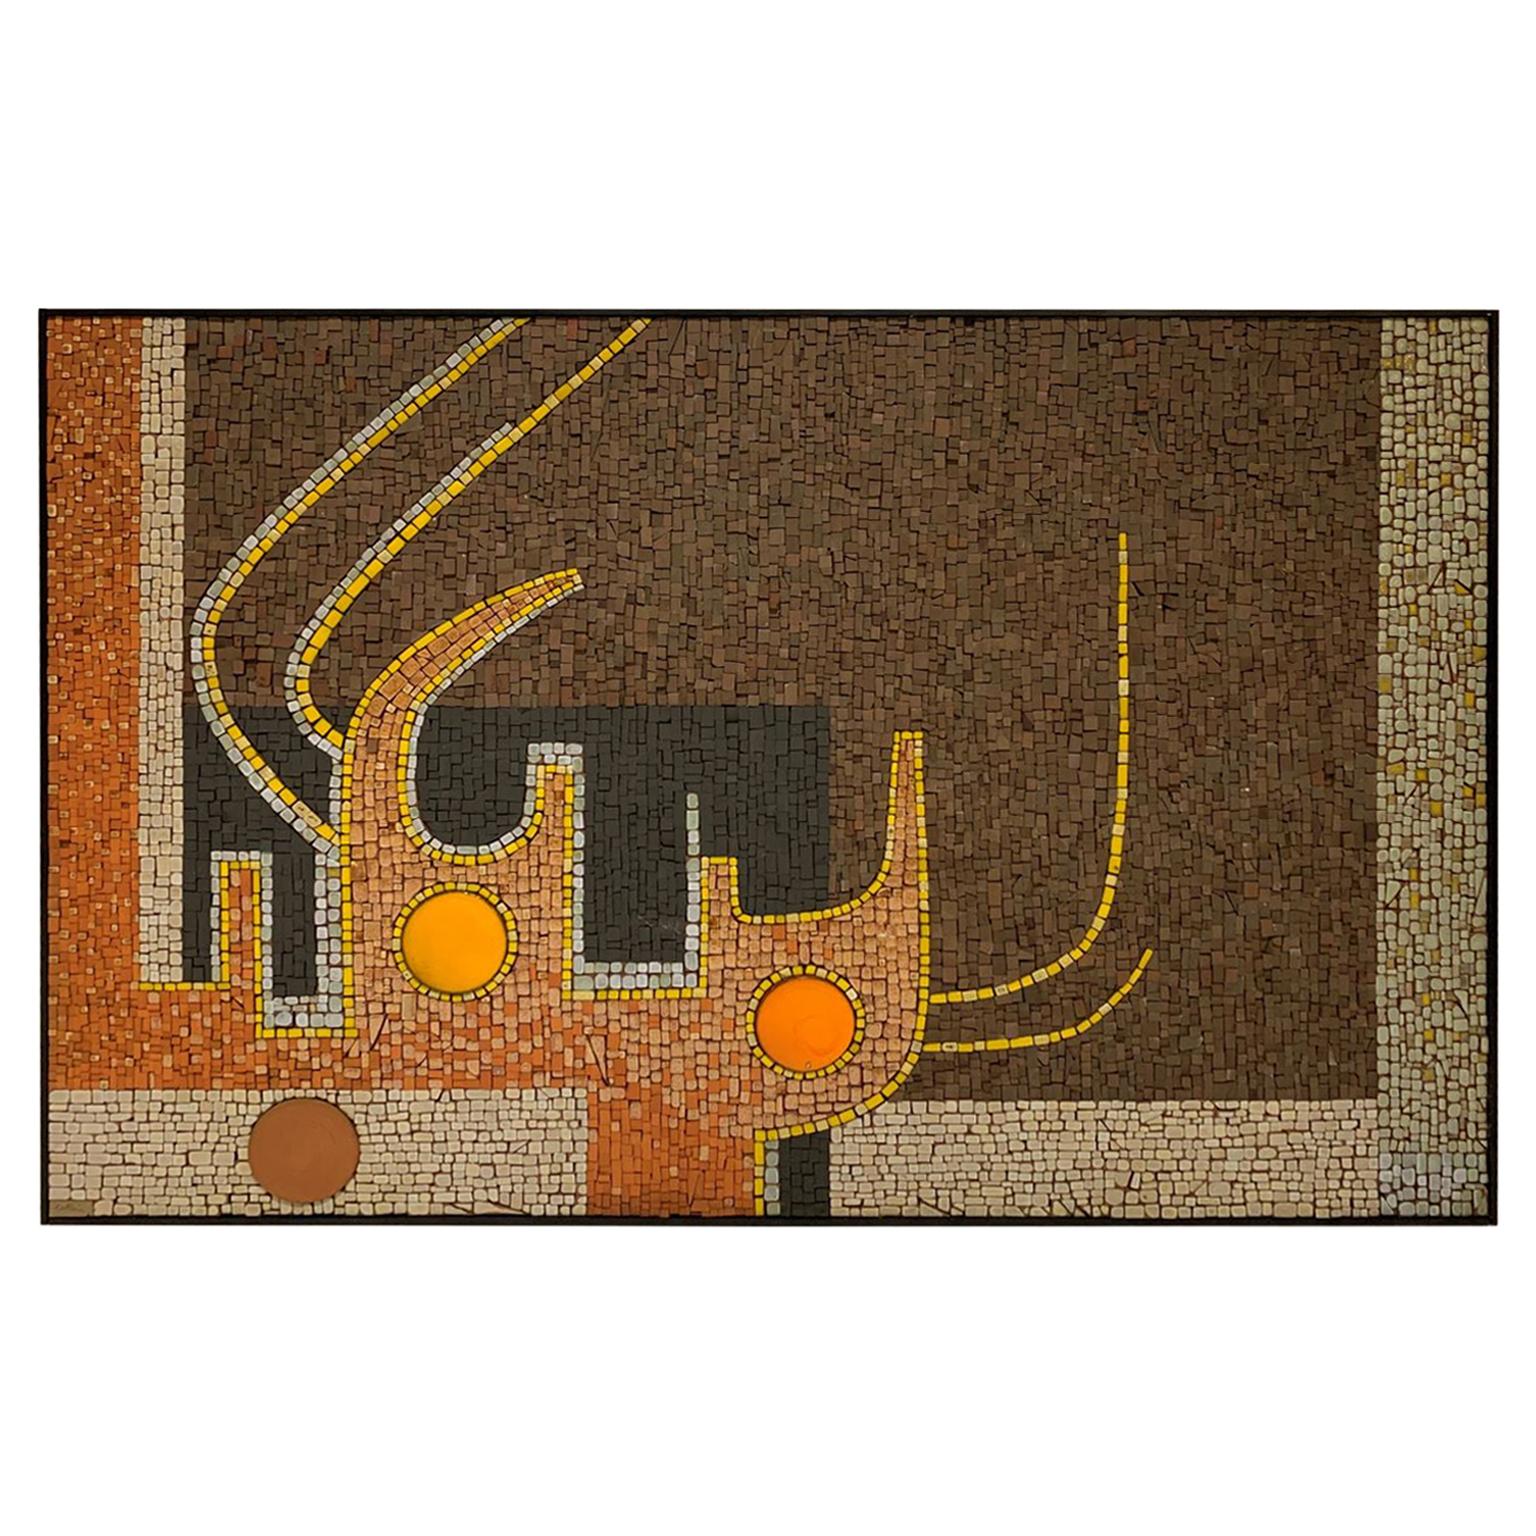 Mid-Century Modern Mosaic Tile Wall Plaque by Raymond Gallucci